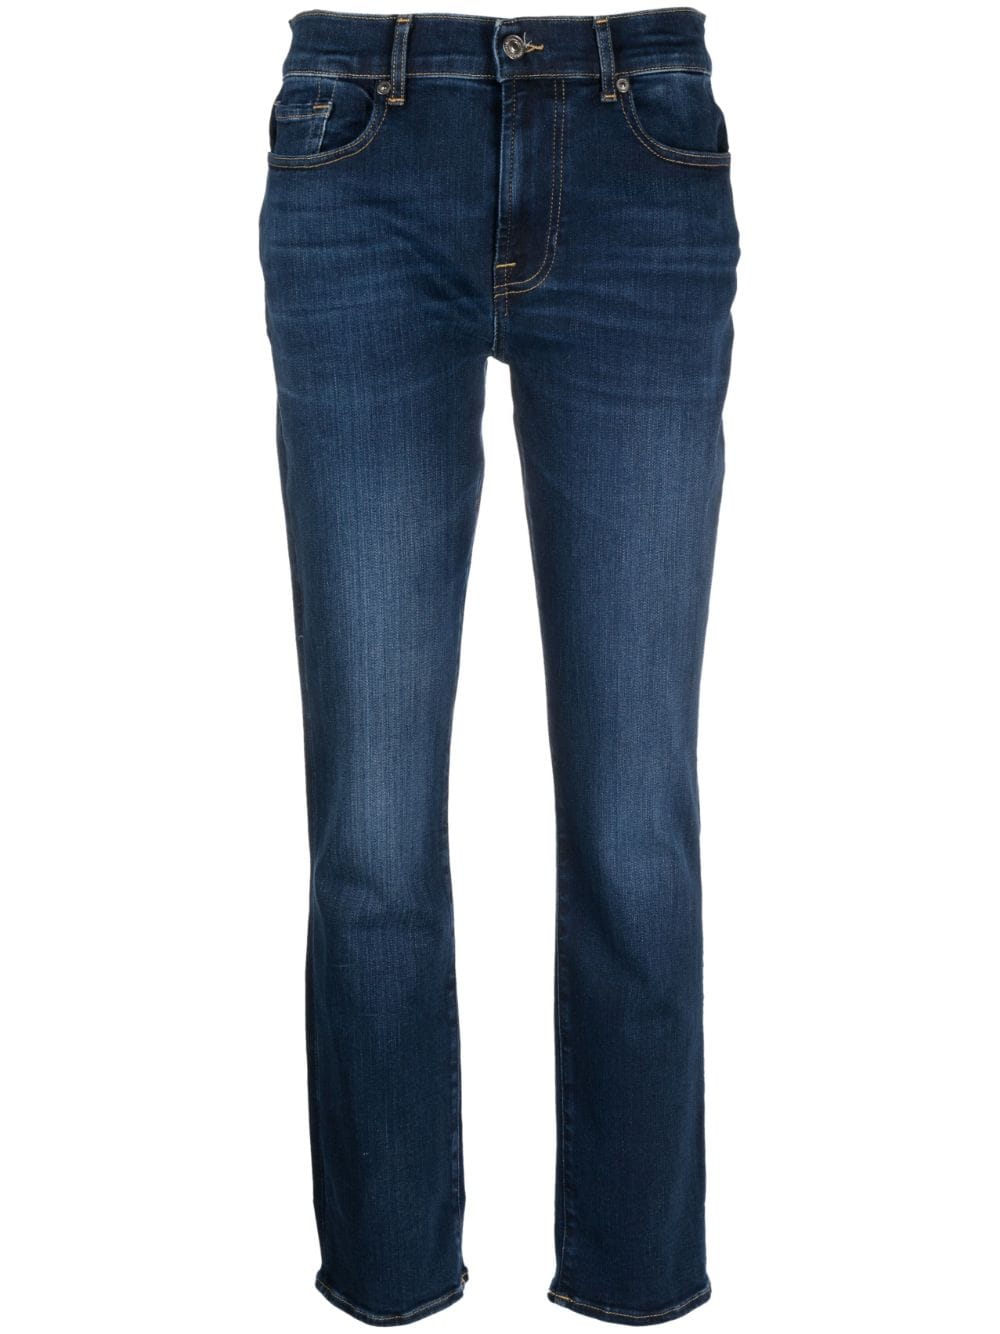 7 For All Mankind Illusion mid-rise cropped jeans - Blue von 7 For All Mankind